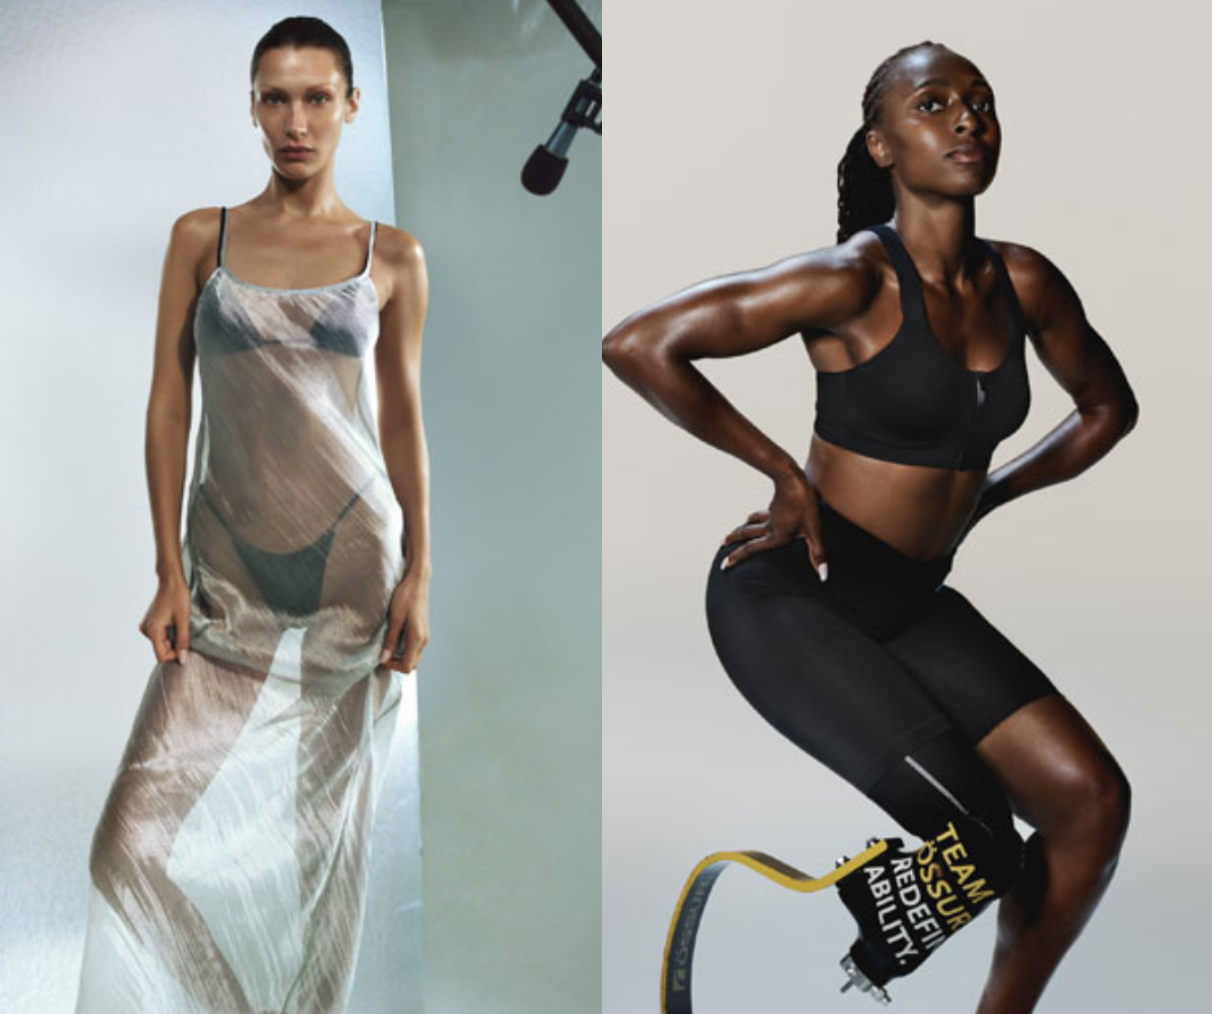 Model Bella Hadid and Paralympic athlete Femita Ayanbeku star in the brand's latest campaign. (Photo provided by Victoria's Secret)